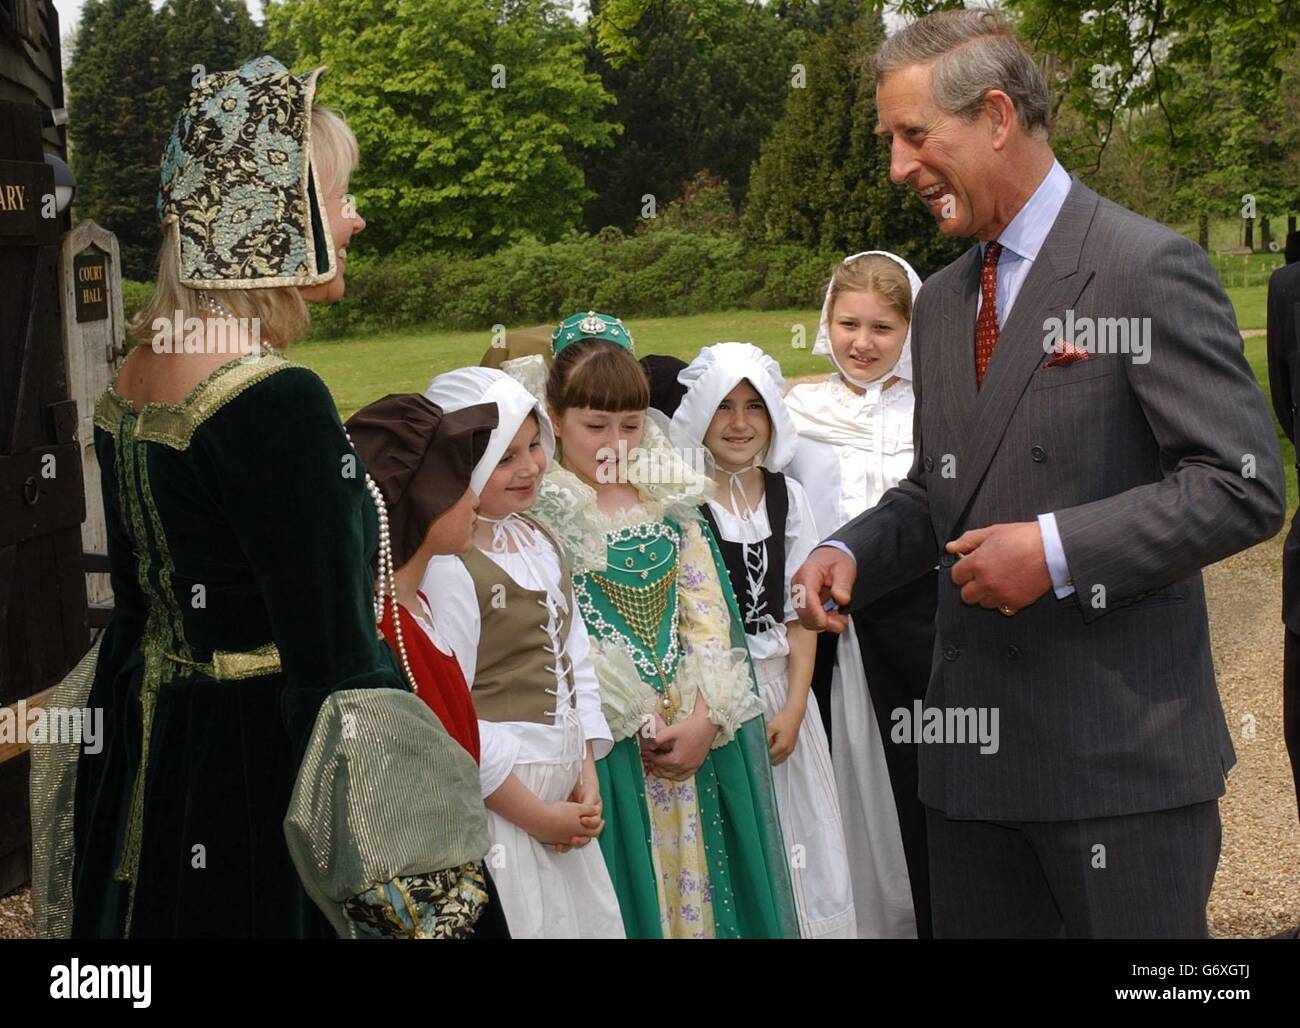 The Prince of Wales meets local school children at an exhibition inside a timber framed barn dating back to the 13th century, at Cressing Temple in Essex, during his visit to the Cressing Estate. The site comprises of ancient barns and buildings and was restored in 1987 by the county council. The Royal visitor was there in 1991 but returns today to see extra work including the development of a Tudor garden. Stock Photo